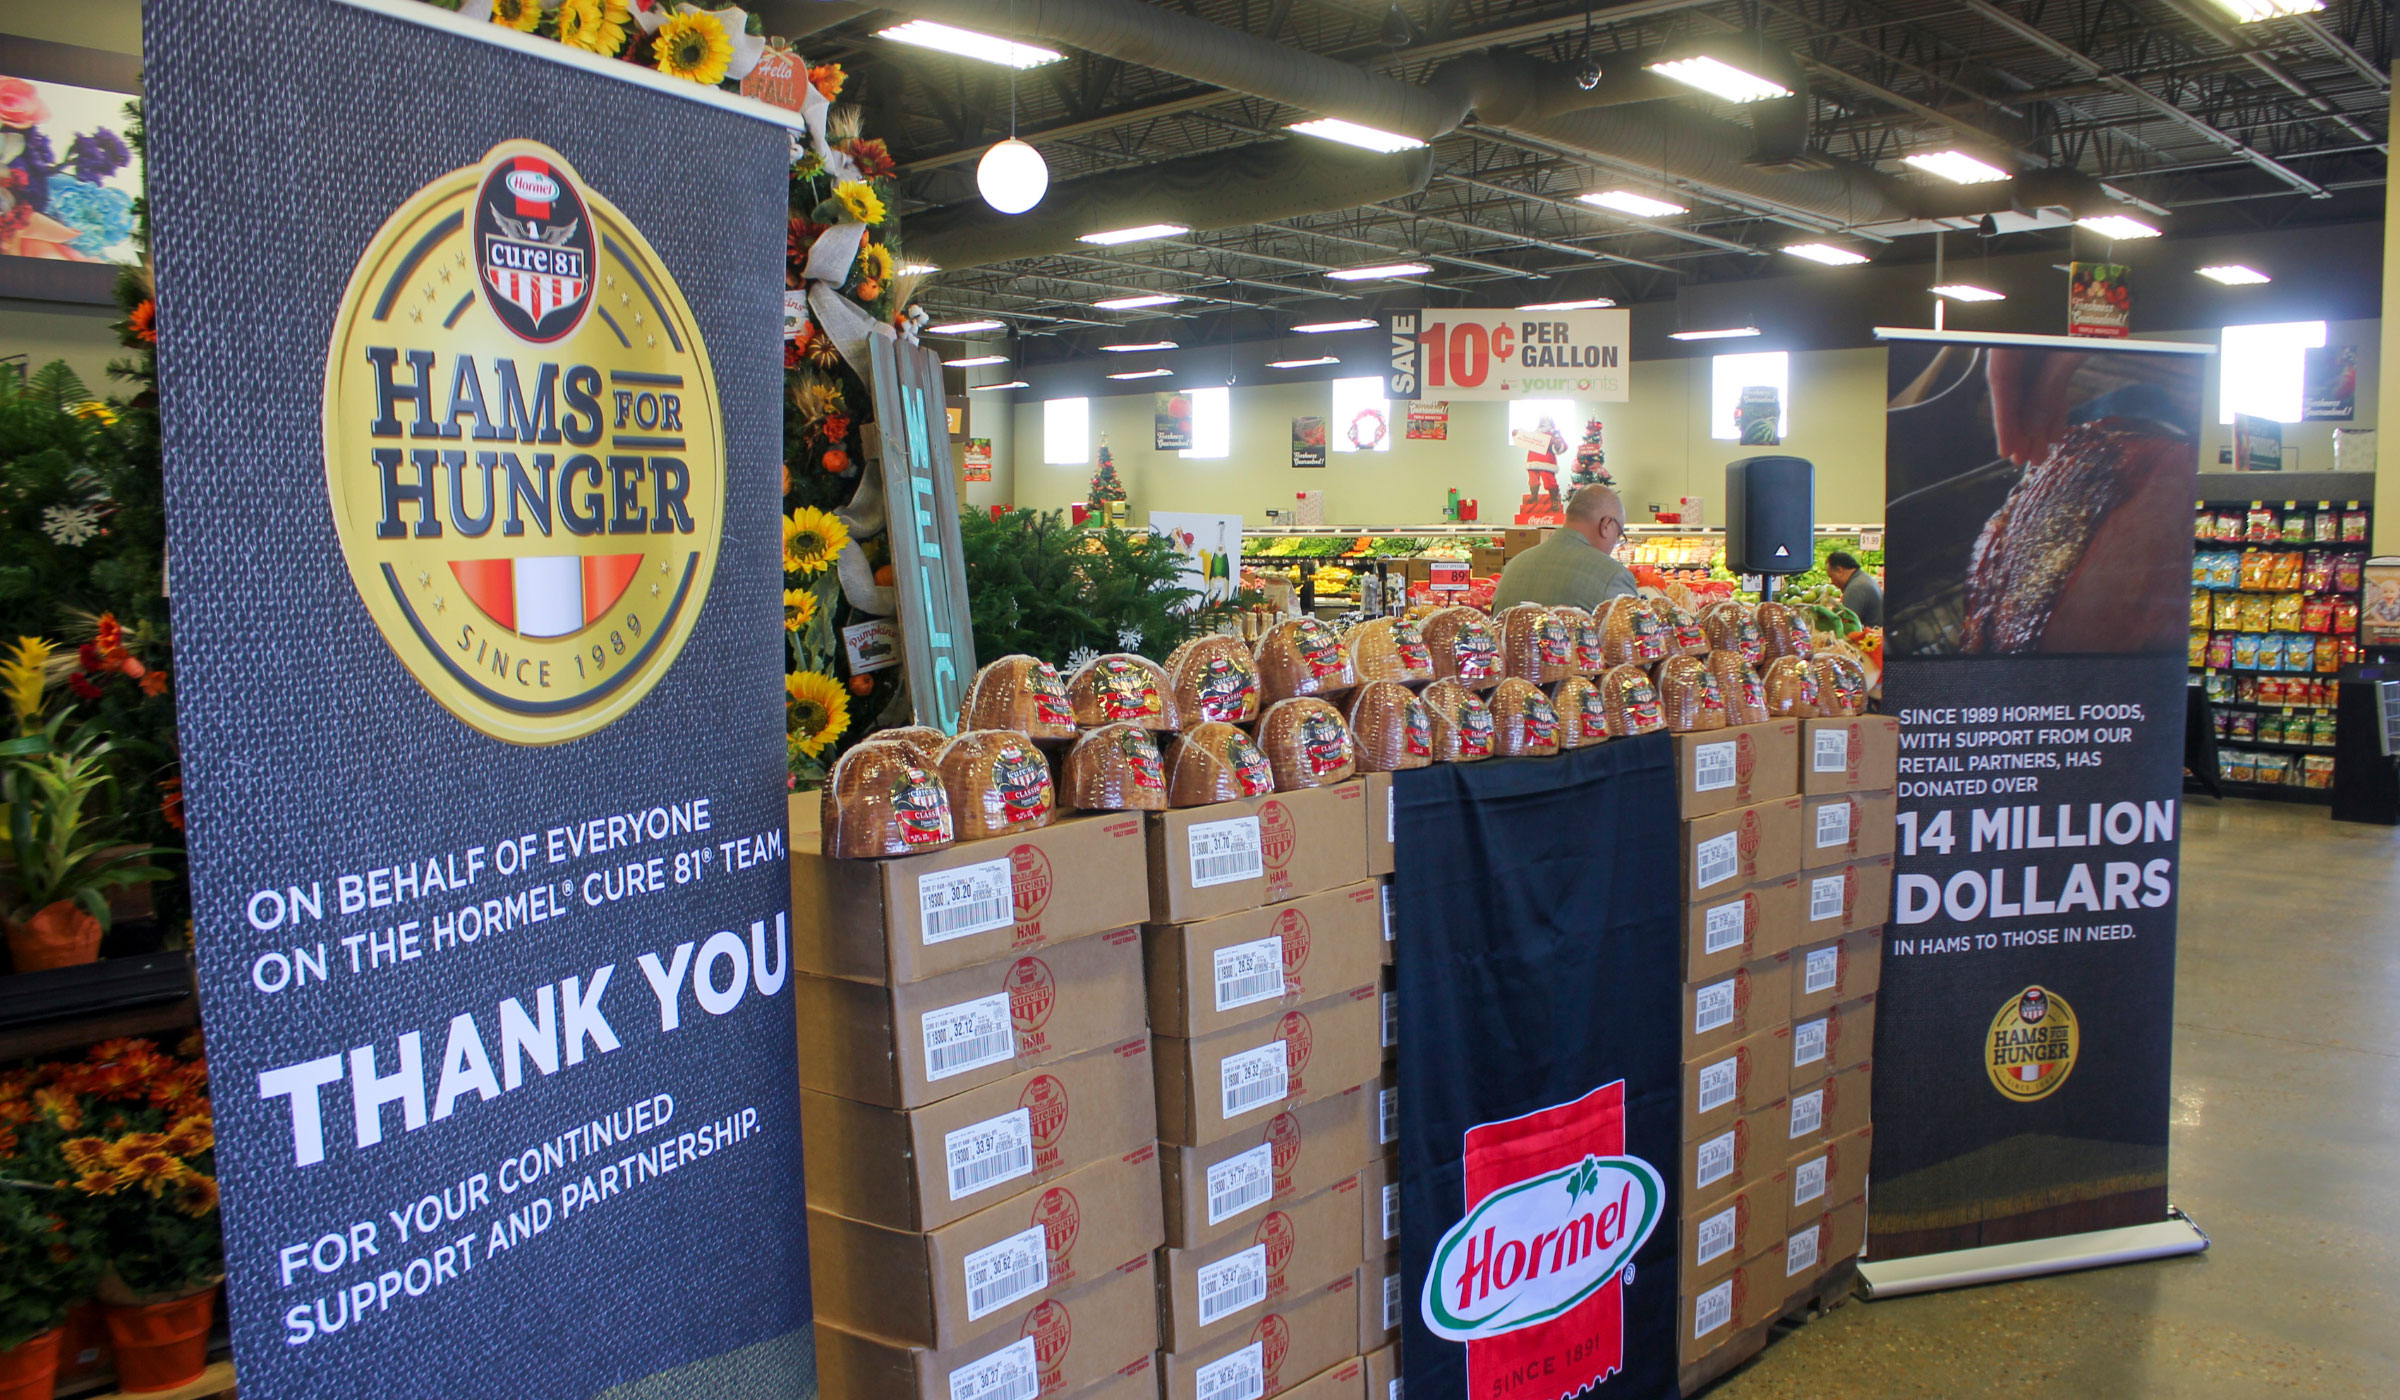 Hams For Hunger branded banner thanking consumers for participating